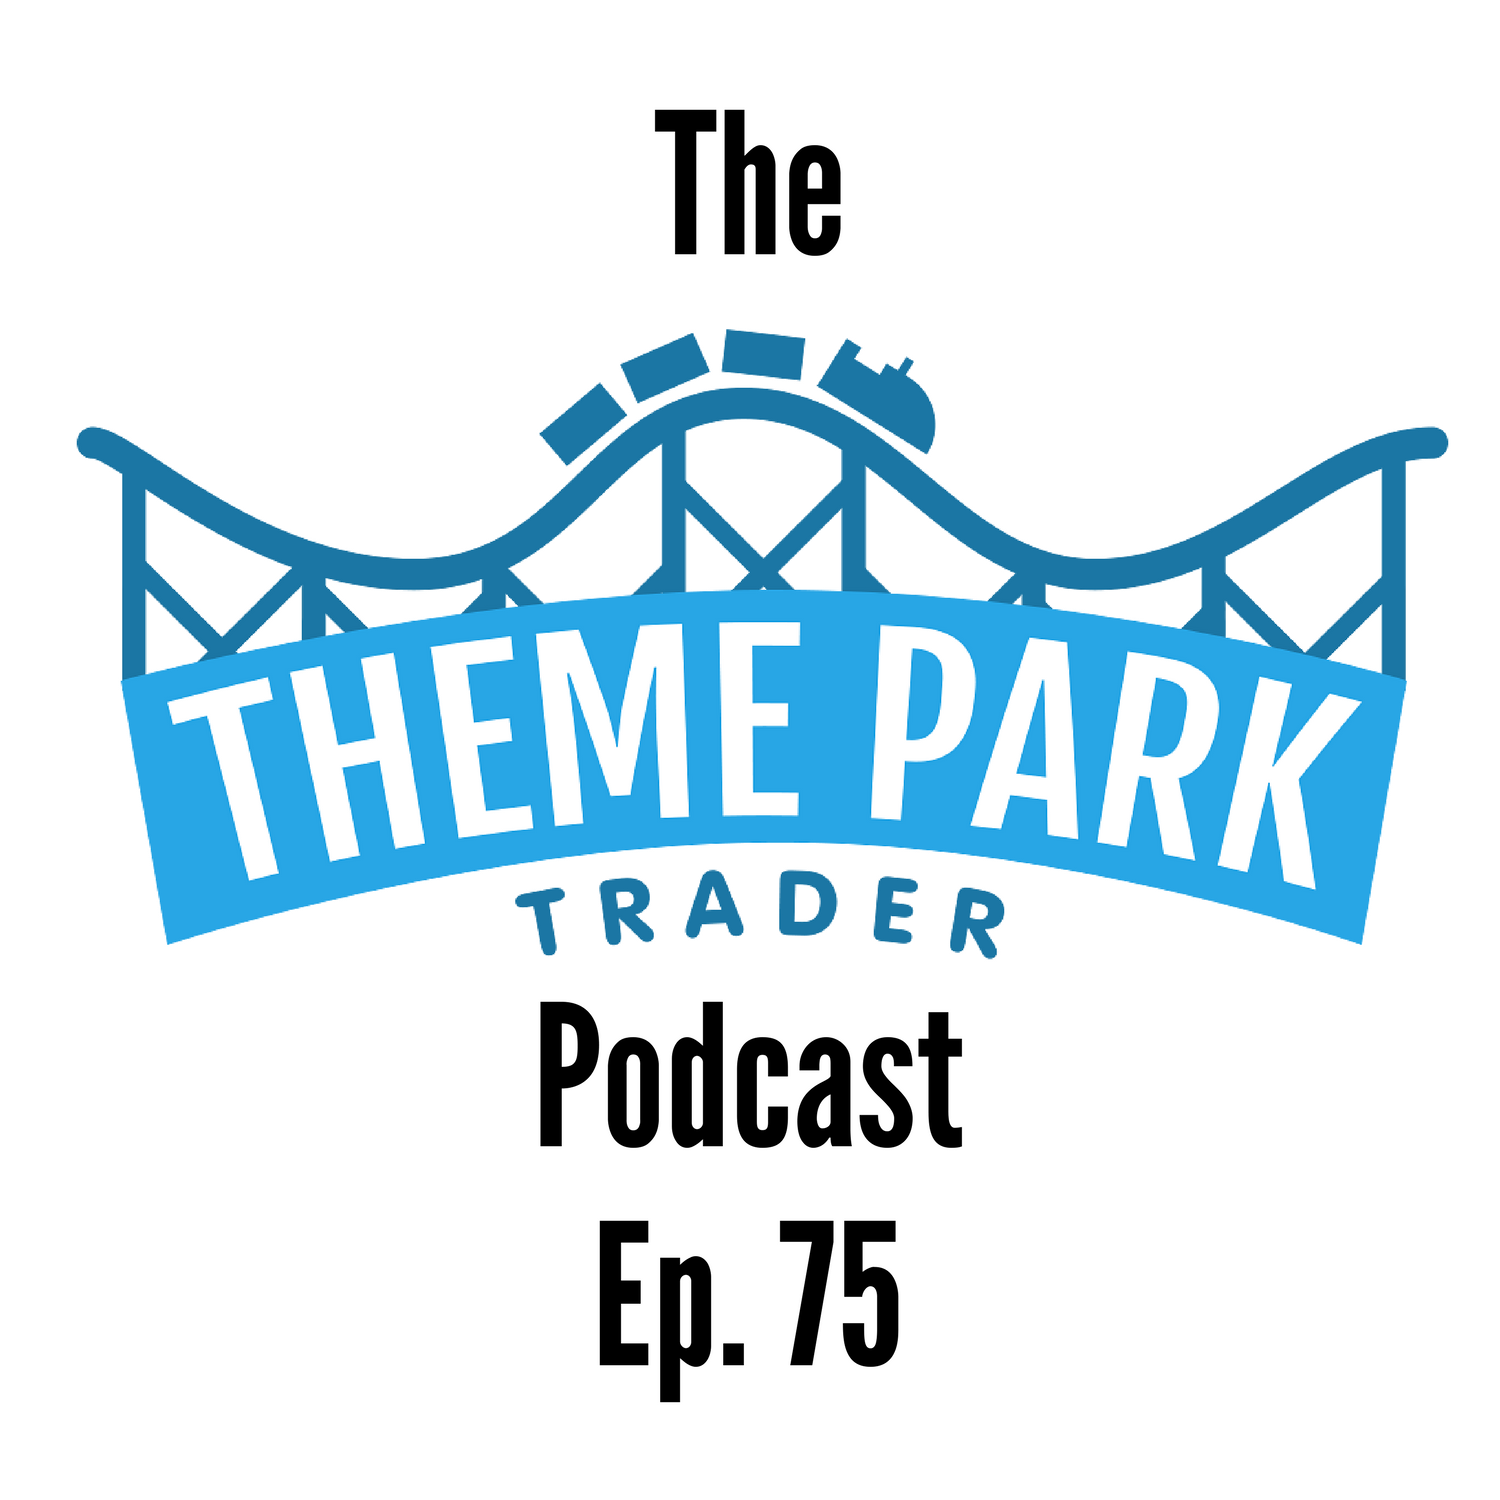 Episode 75 - Redhead Scene Being Replaced on Pirates, Gift Cards Being Offered Instead of Room Cleaning, Poor Reviews of Great Theme Park Attractions Returns with Spaceship Earth + More!